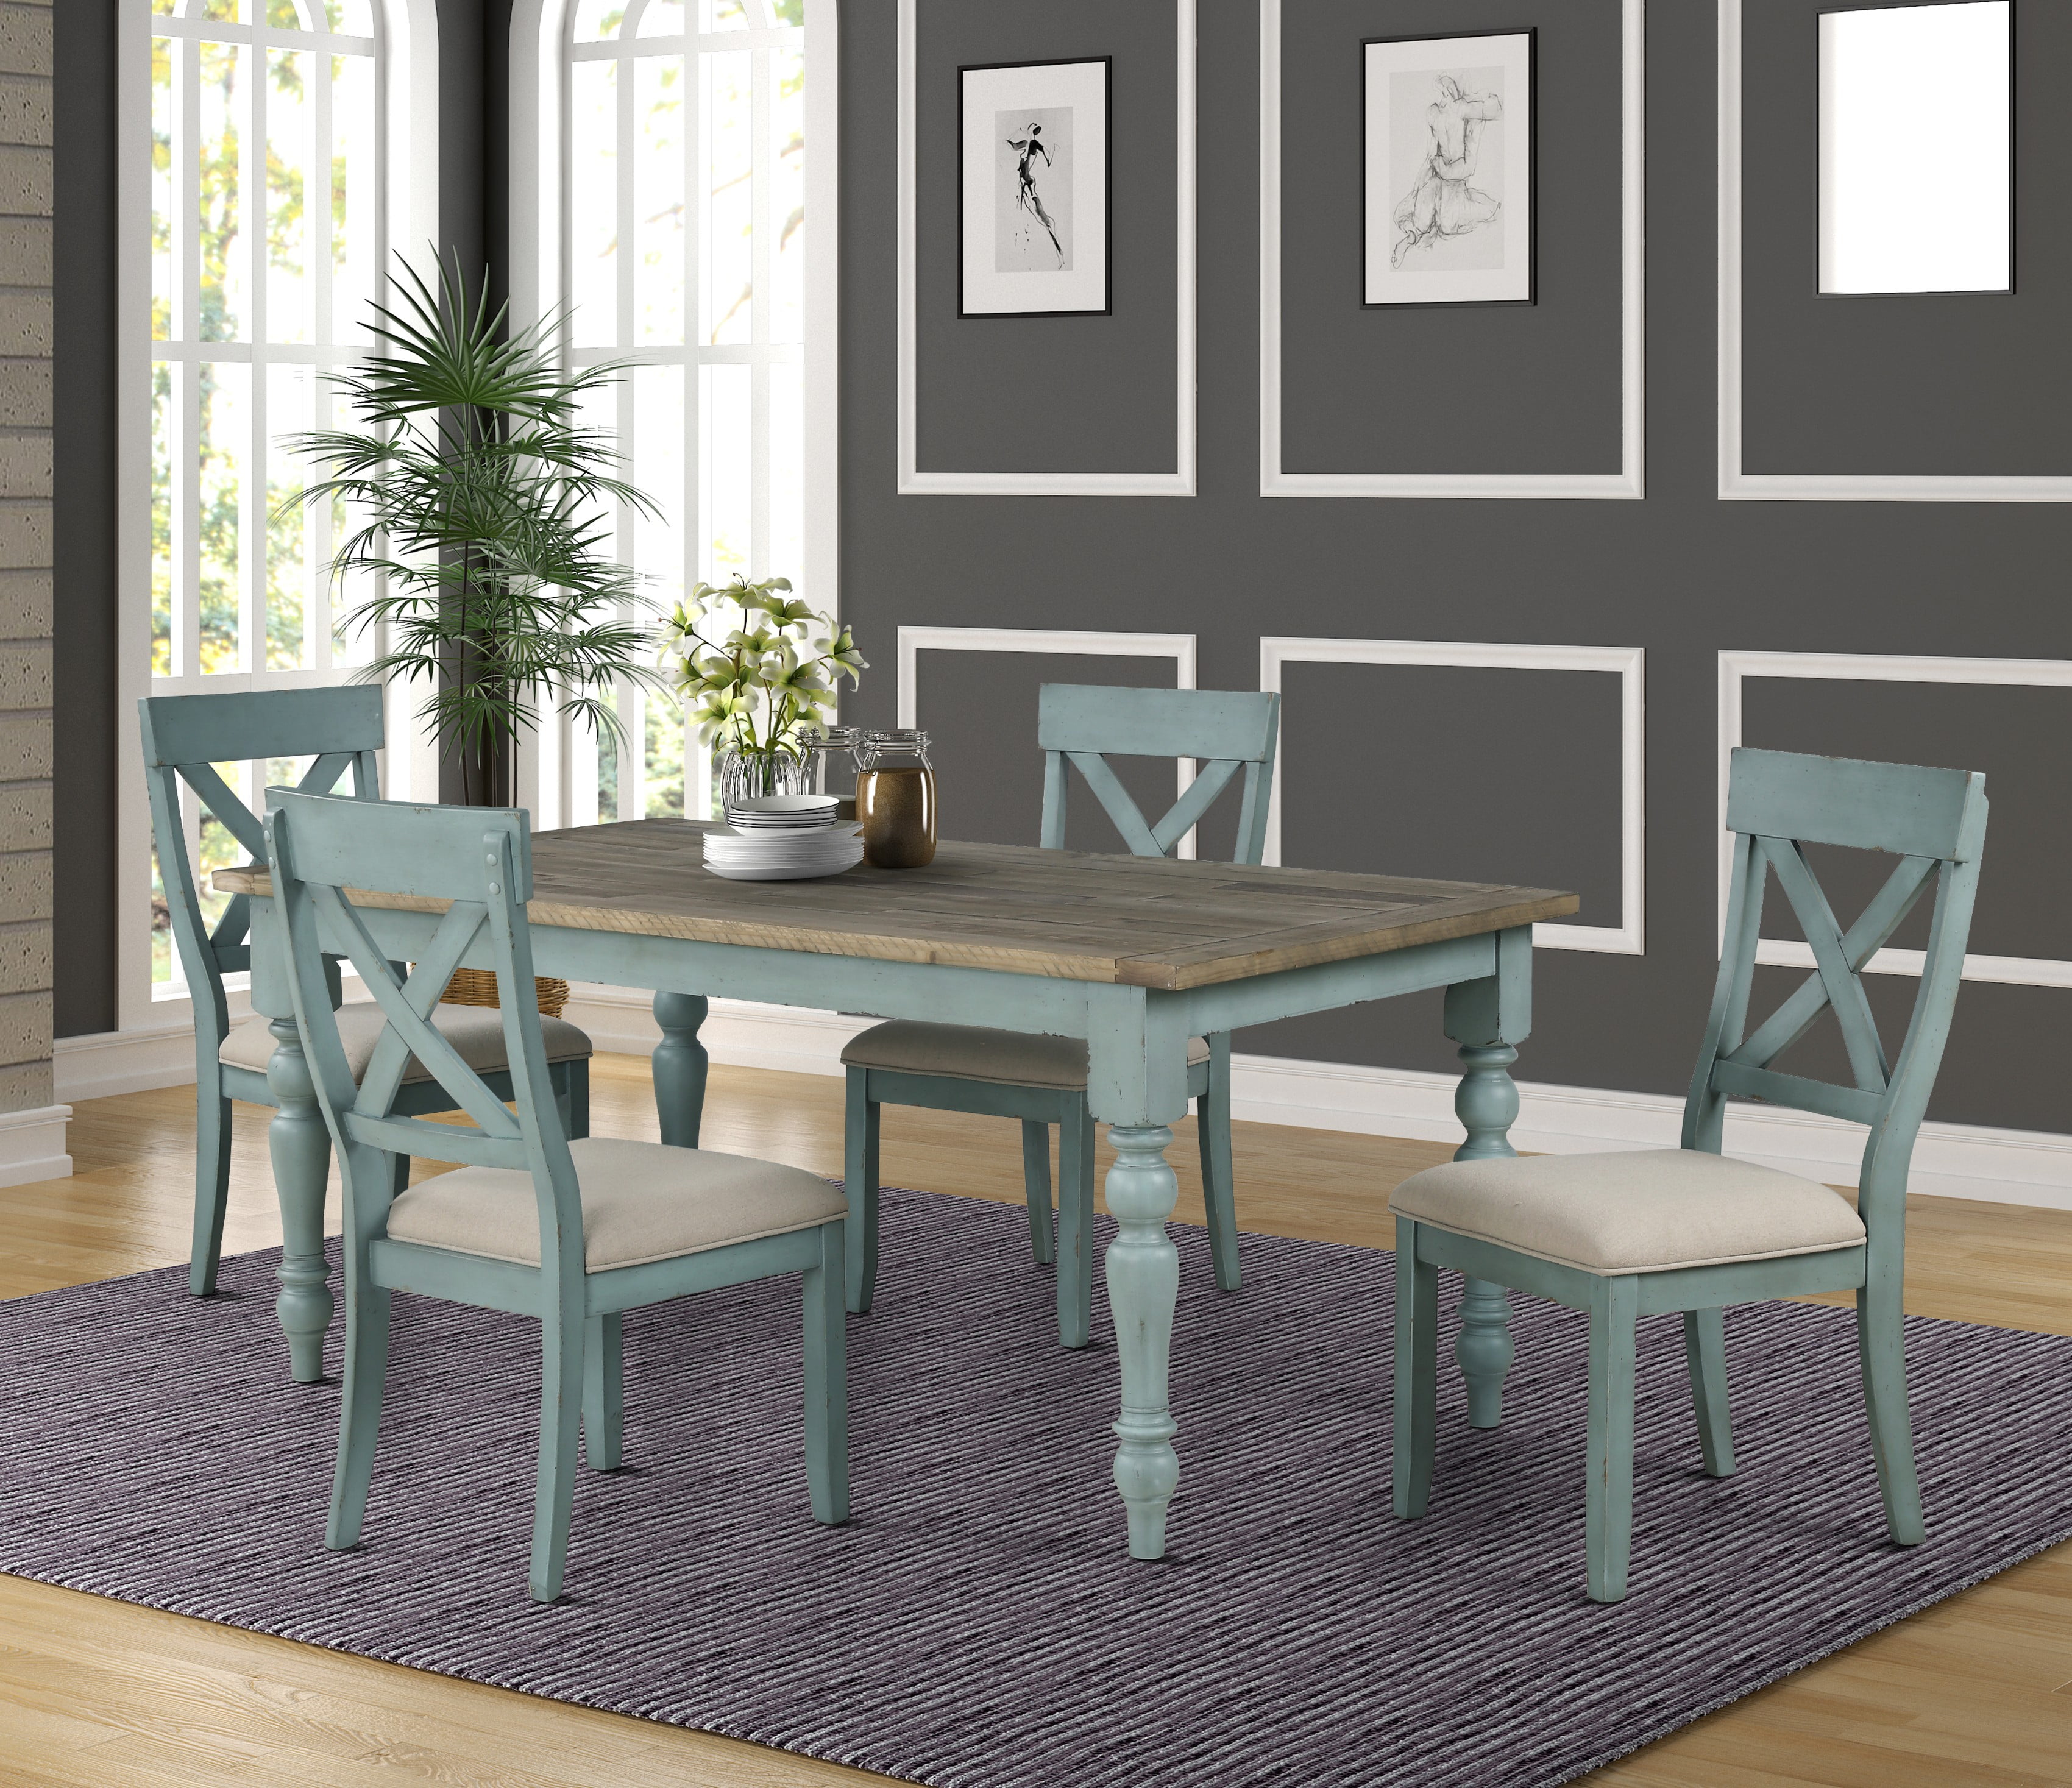 5 Piece Round Dining Table Set, Farmhouse Round Dining Table Sets